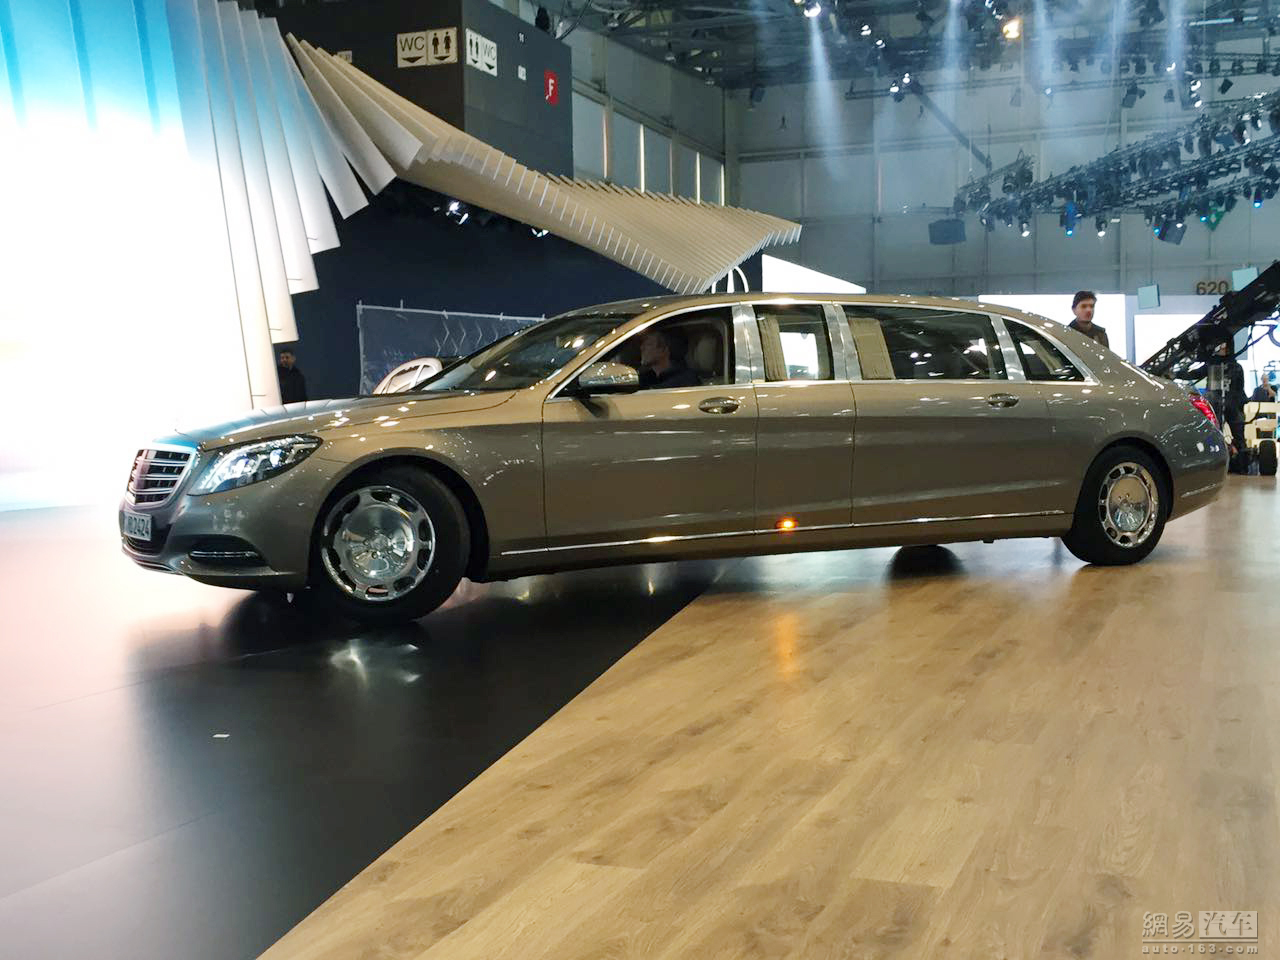 Mercedes Maybach S600 Pullman Fully Exposed